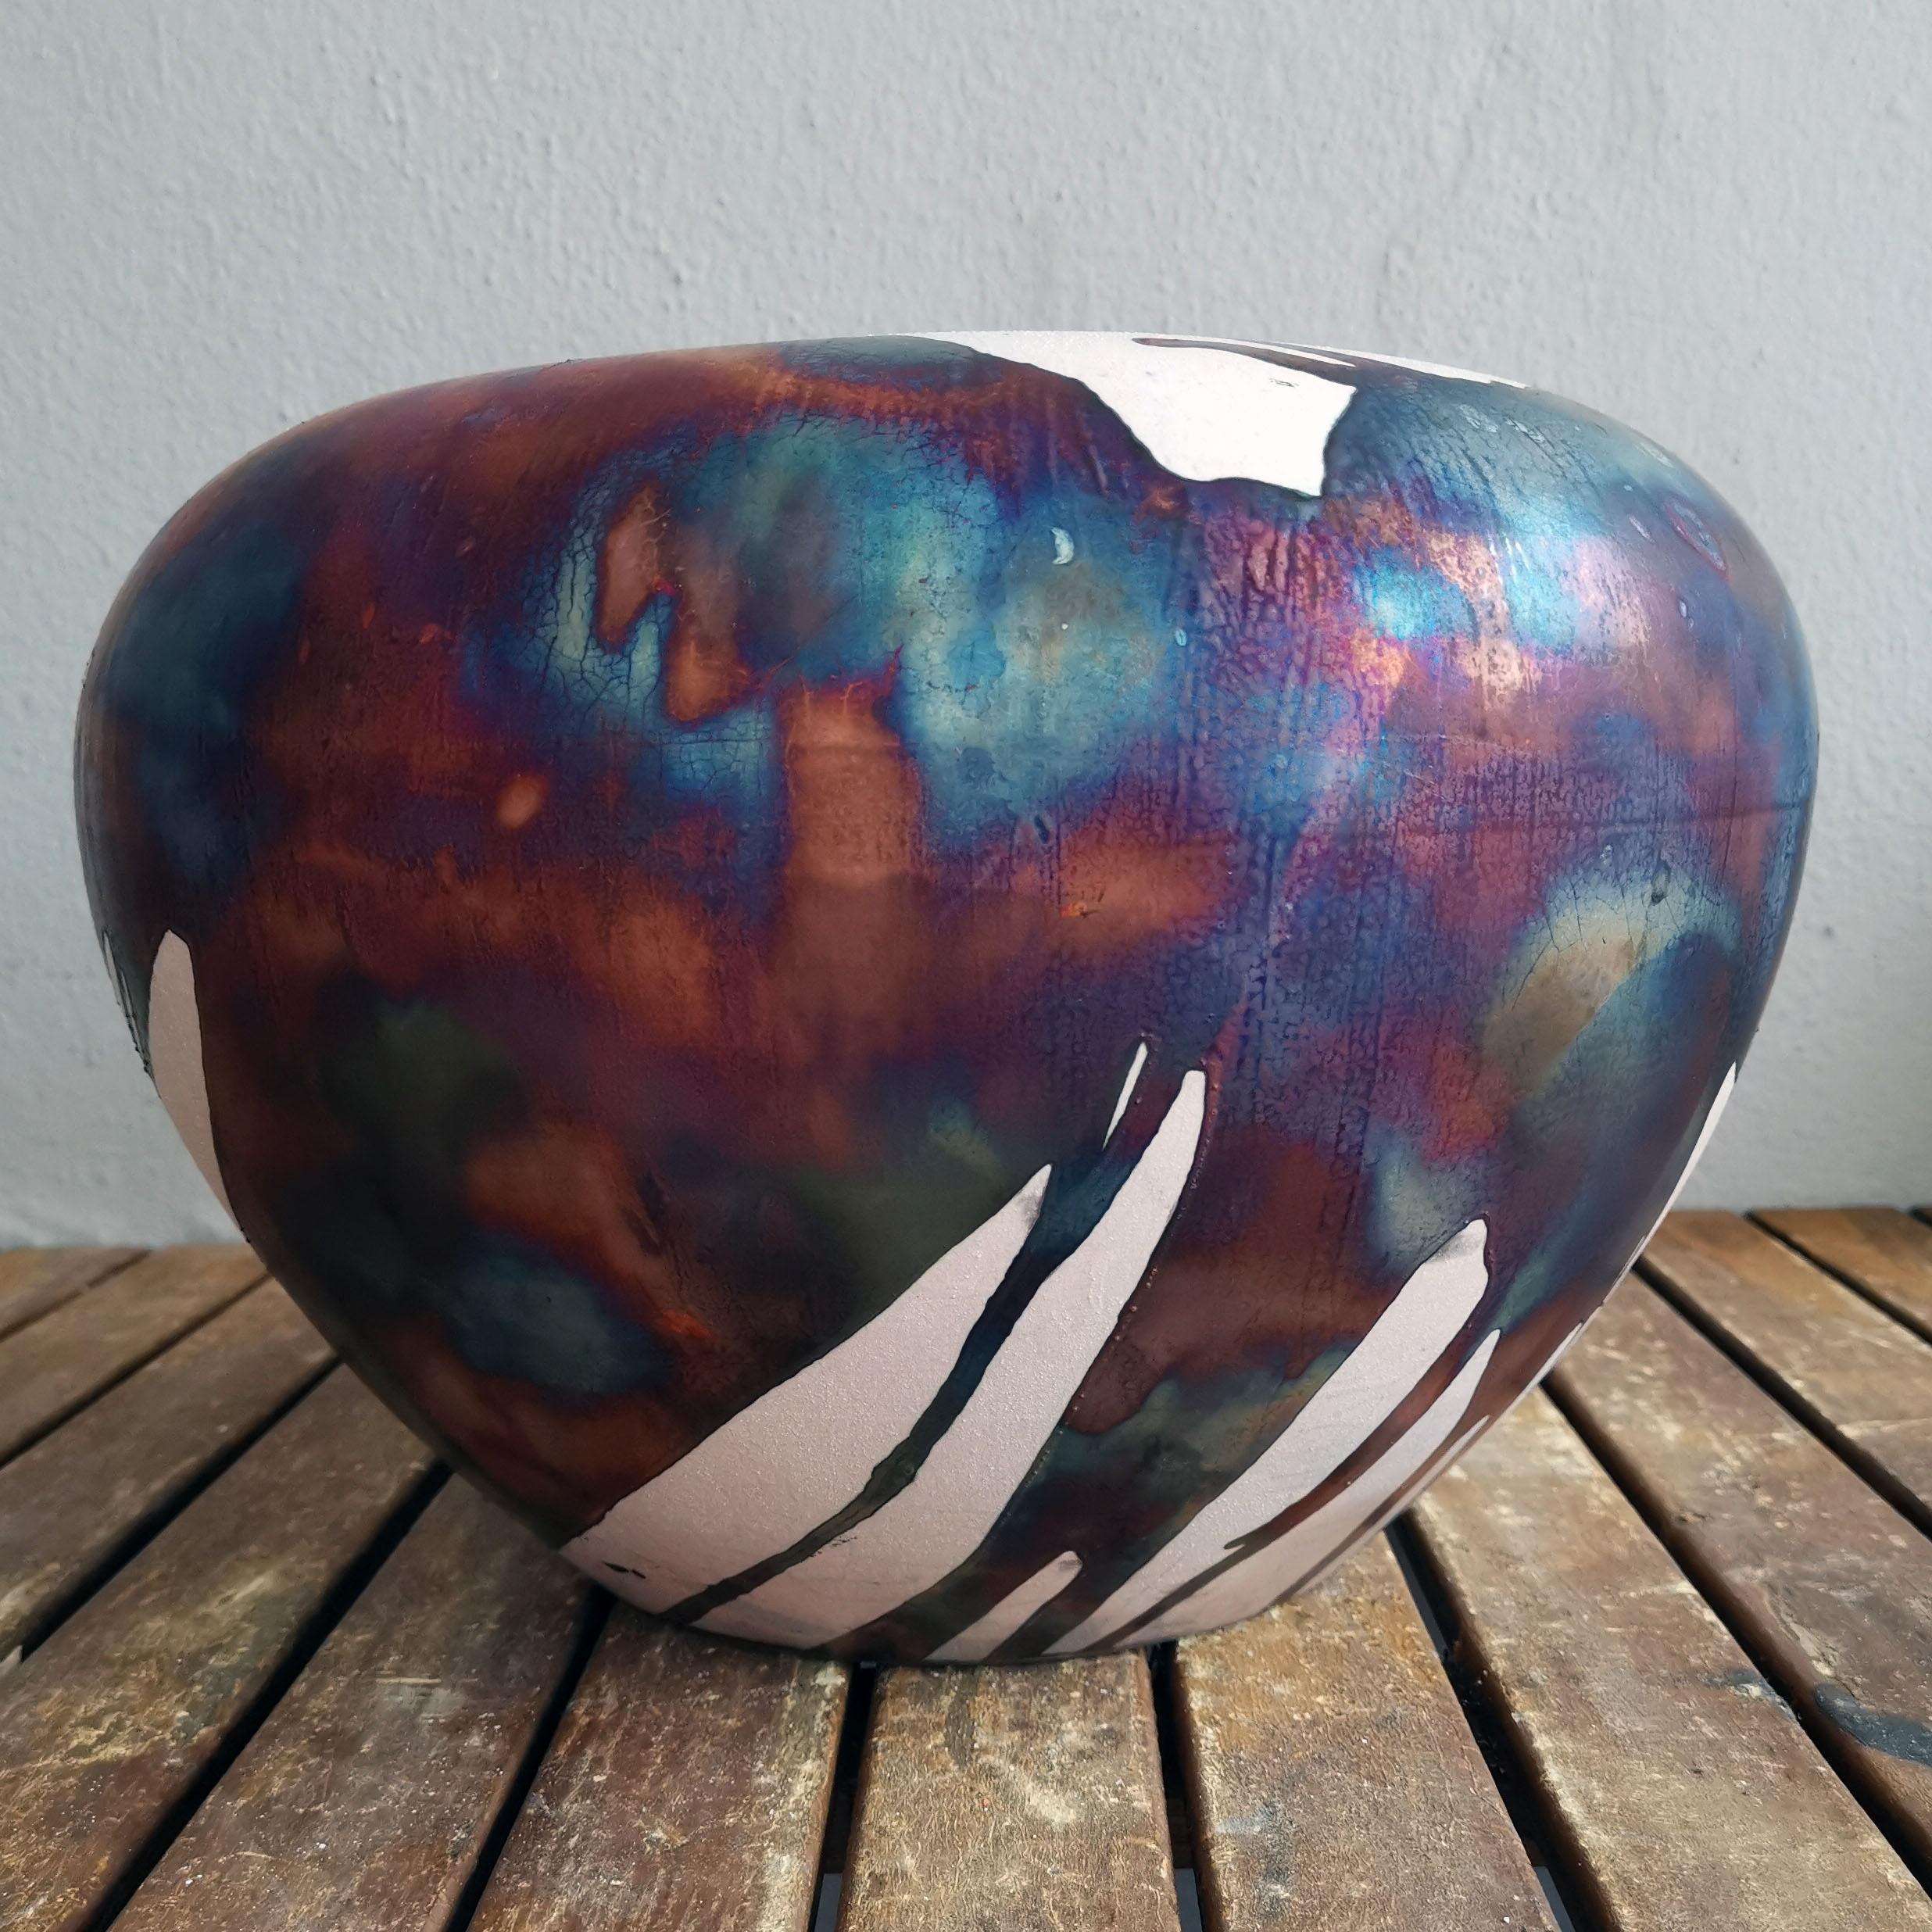 Tsubomi ~ Bud

A mesmerizing sight to behold as soon as the rainbow-like patinas catch your eye. The Tsubomi Vase is a wide Art Series vase that resembles an unopened flower bud. This vase easily becomes a centerpiece in any environment and will